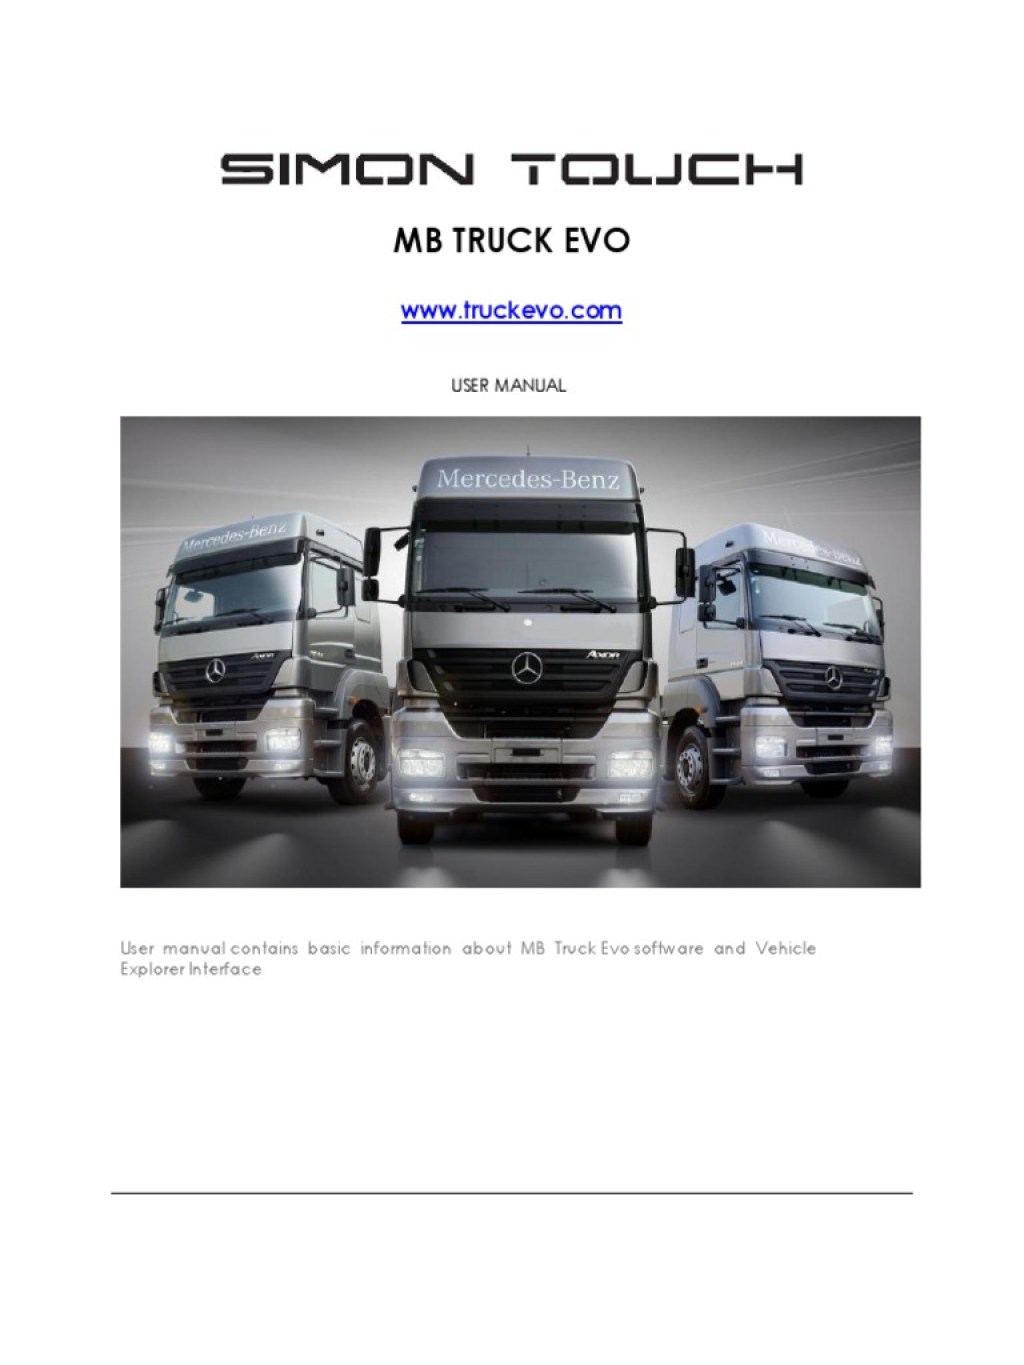 Picture of: Truck Evo Manual Final  PDF  Flash Memory  Electrical Connector